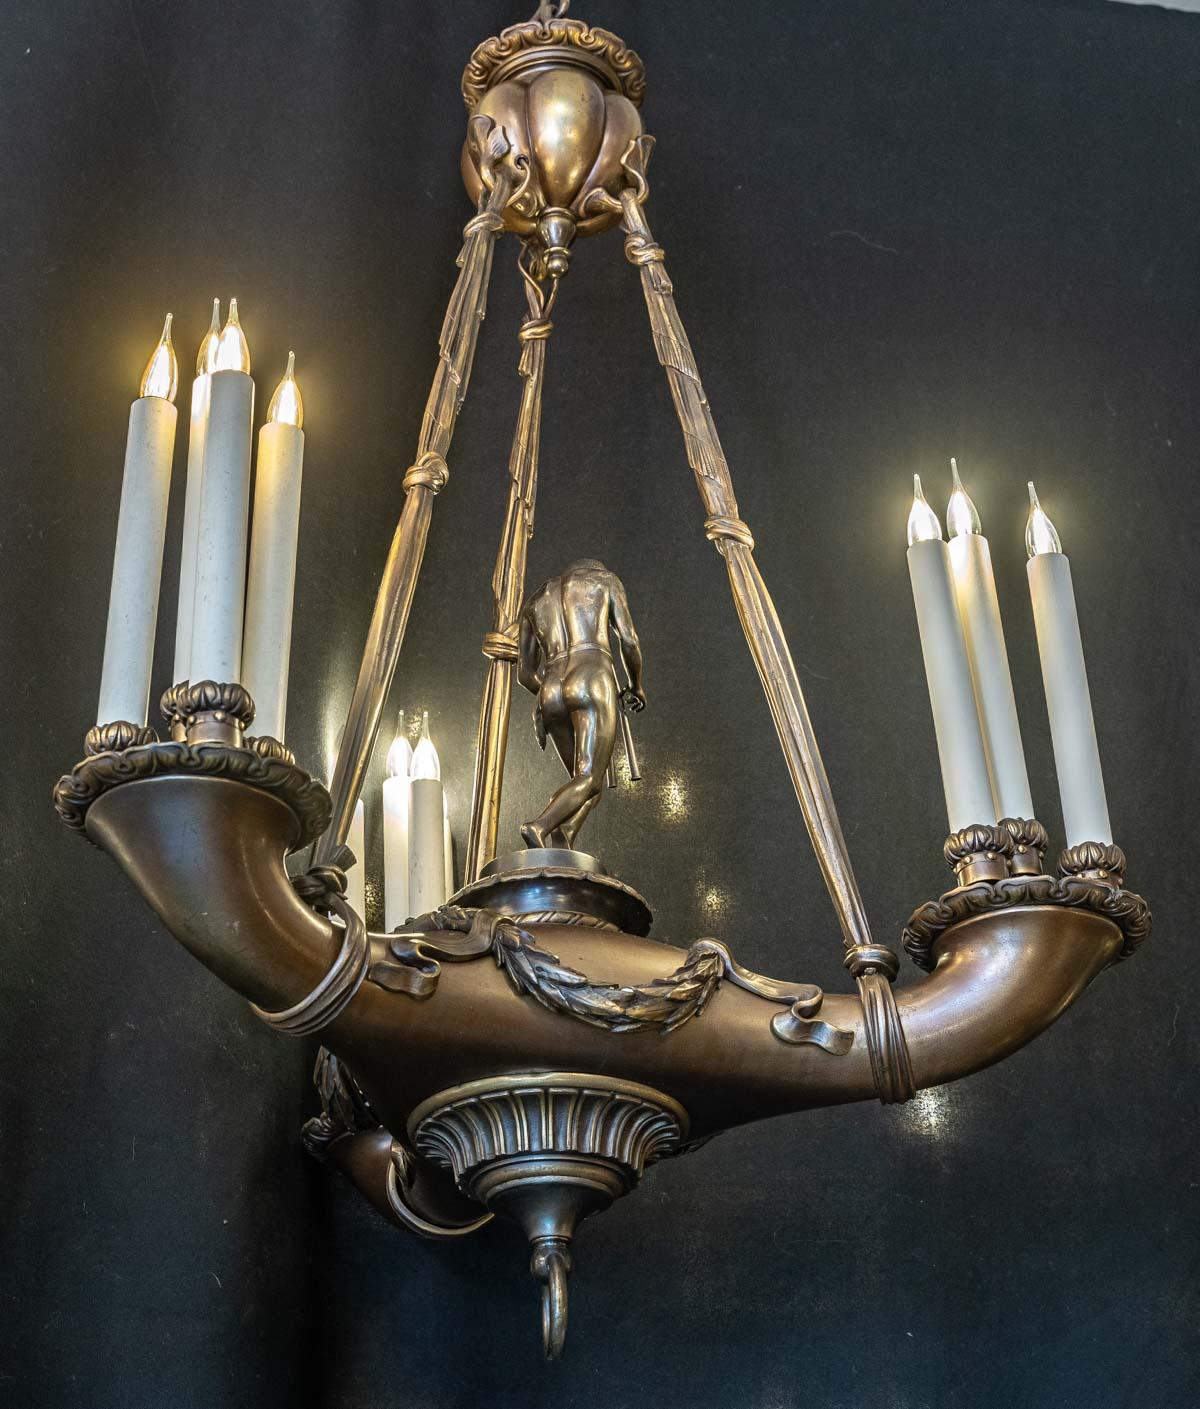 Important bronze chandelier with flute form, 12 lights, 20th century.
With chain - H: 130 cm, D: 70 cm.
without chain - H: 105, D: 70 cm.